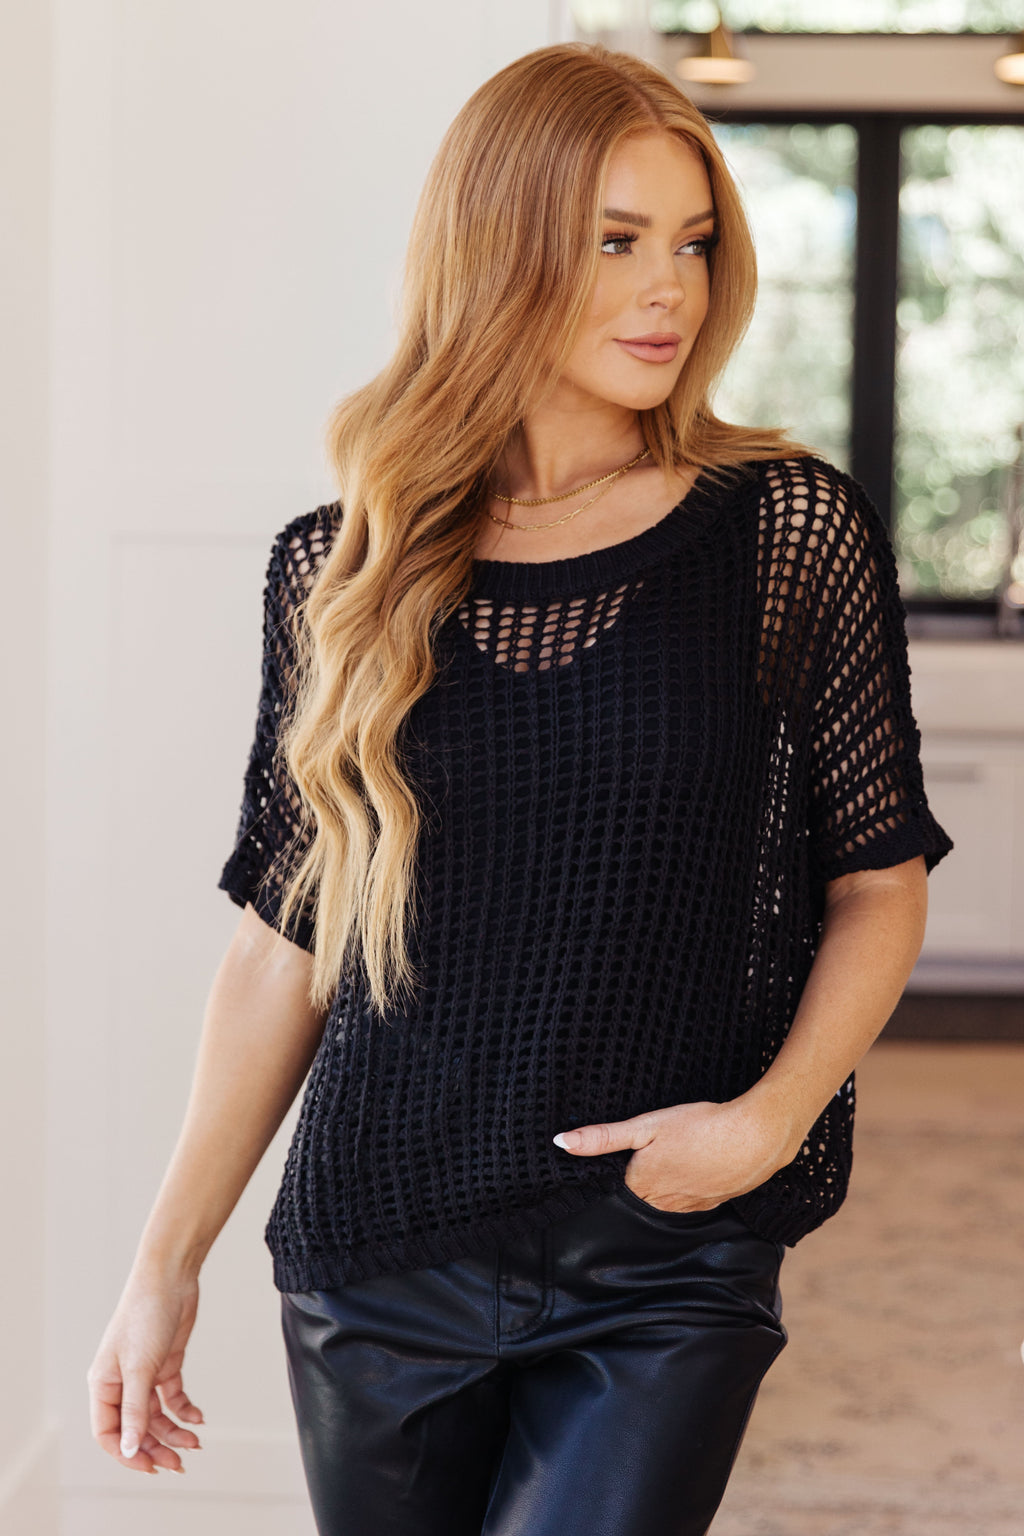 Fashionable Fishnet Top in Black